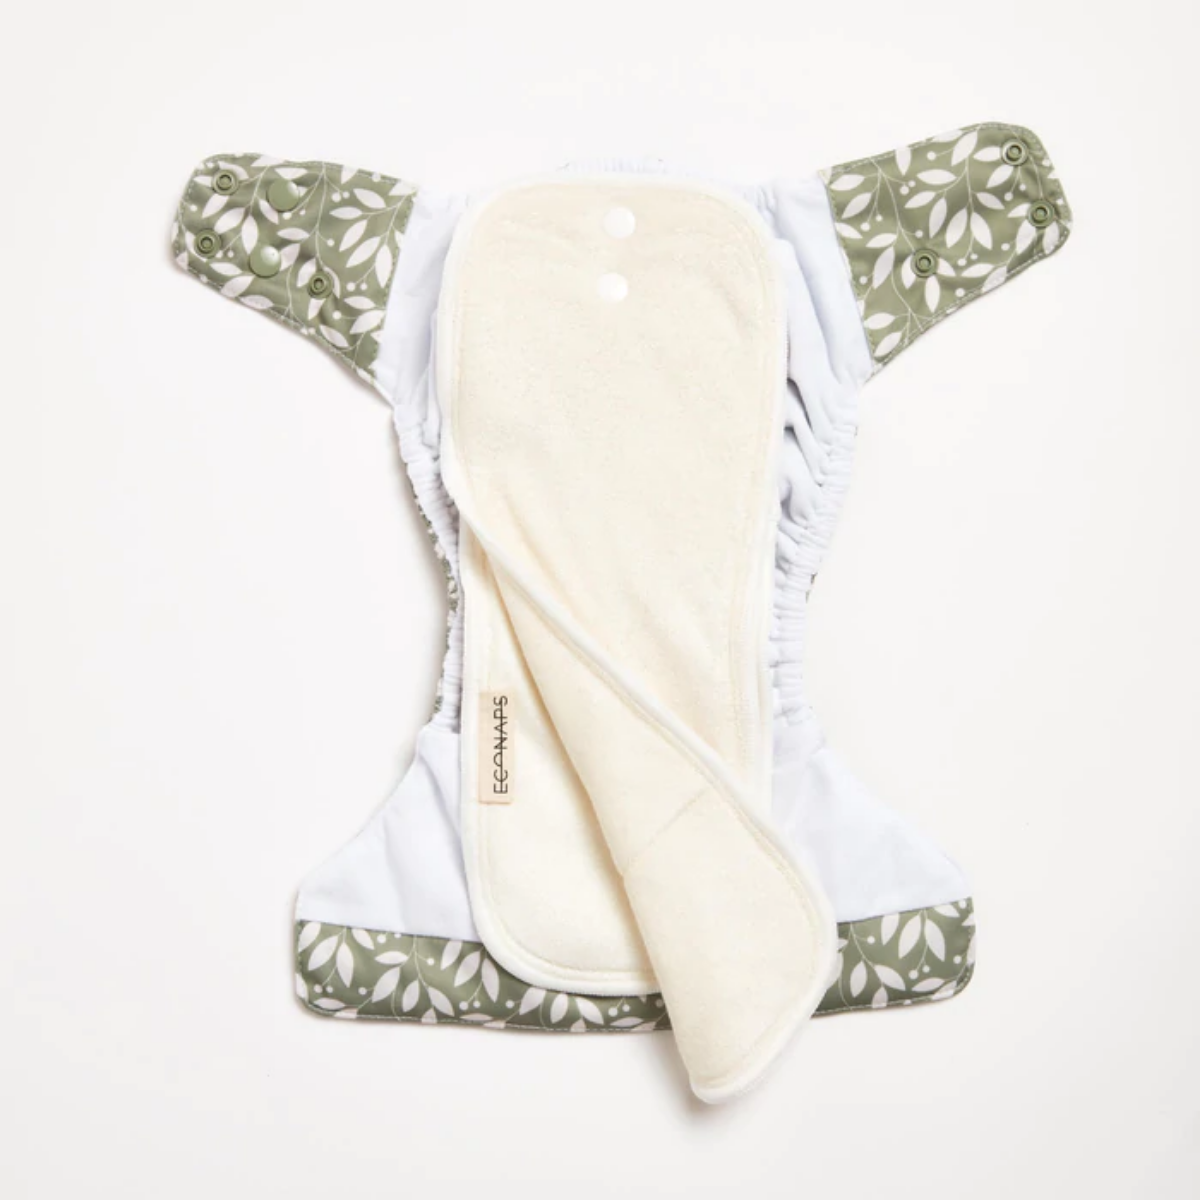 An open Sage 2.0 Modern Cloth Nappy by EcoNaps on a white surface.